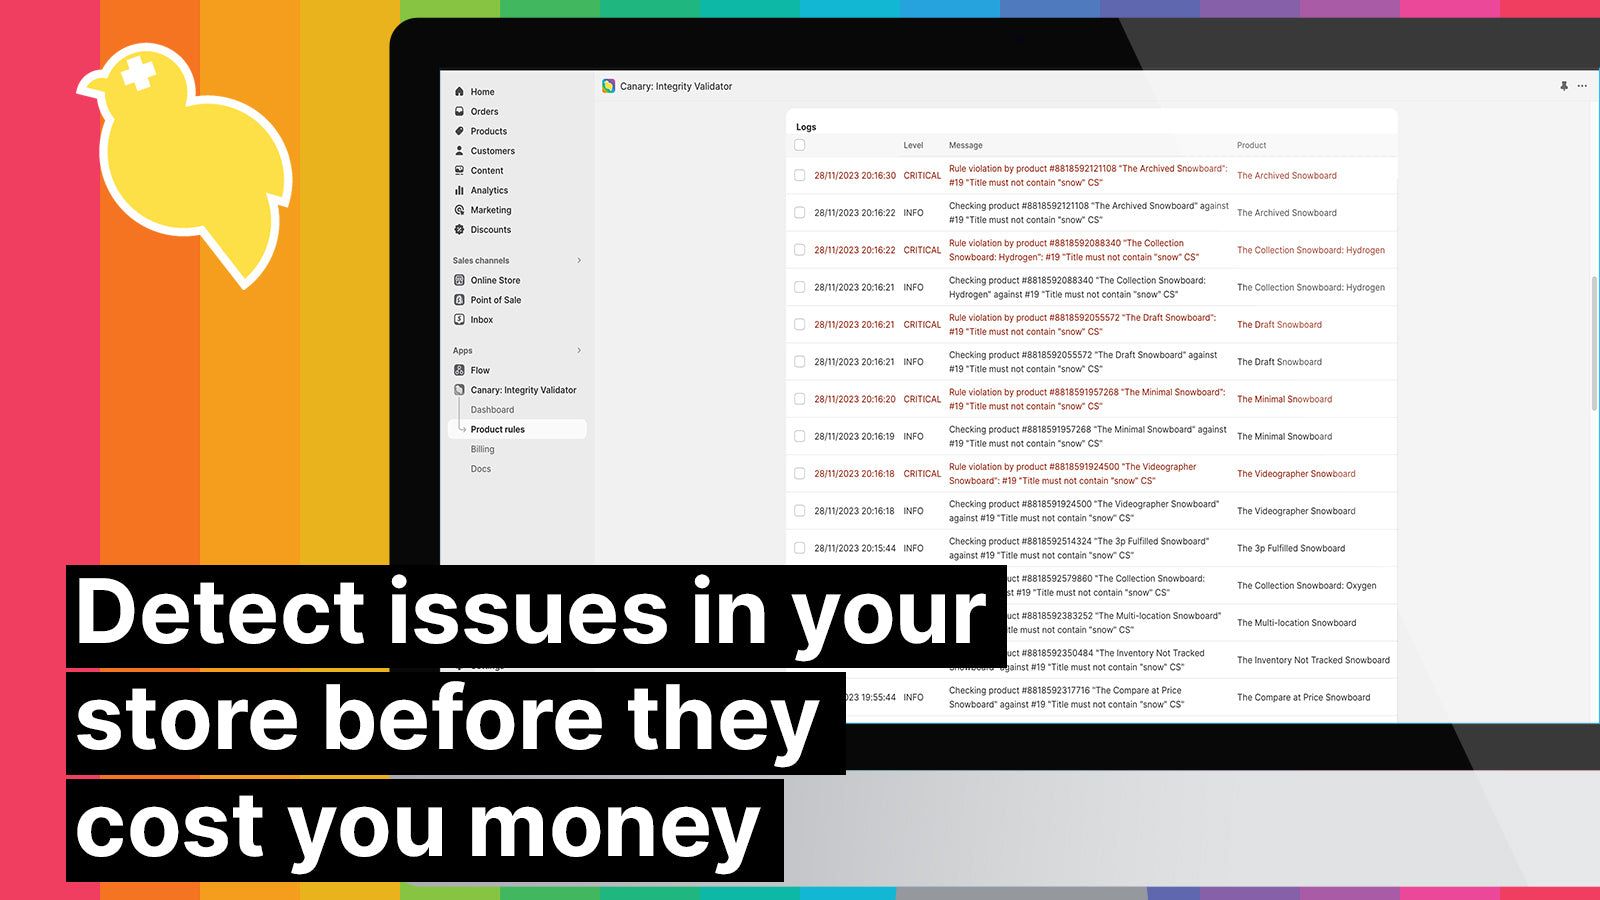 Detect issues in your store before they cost you money